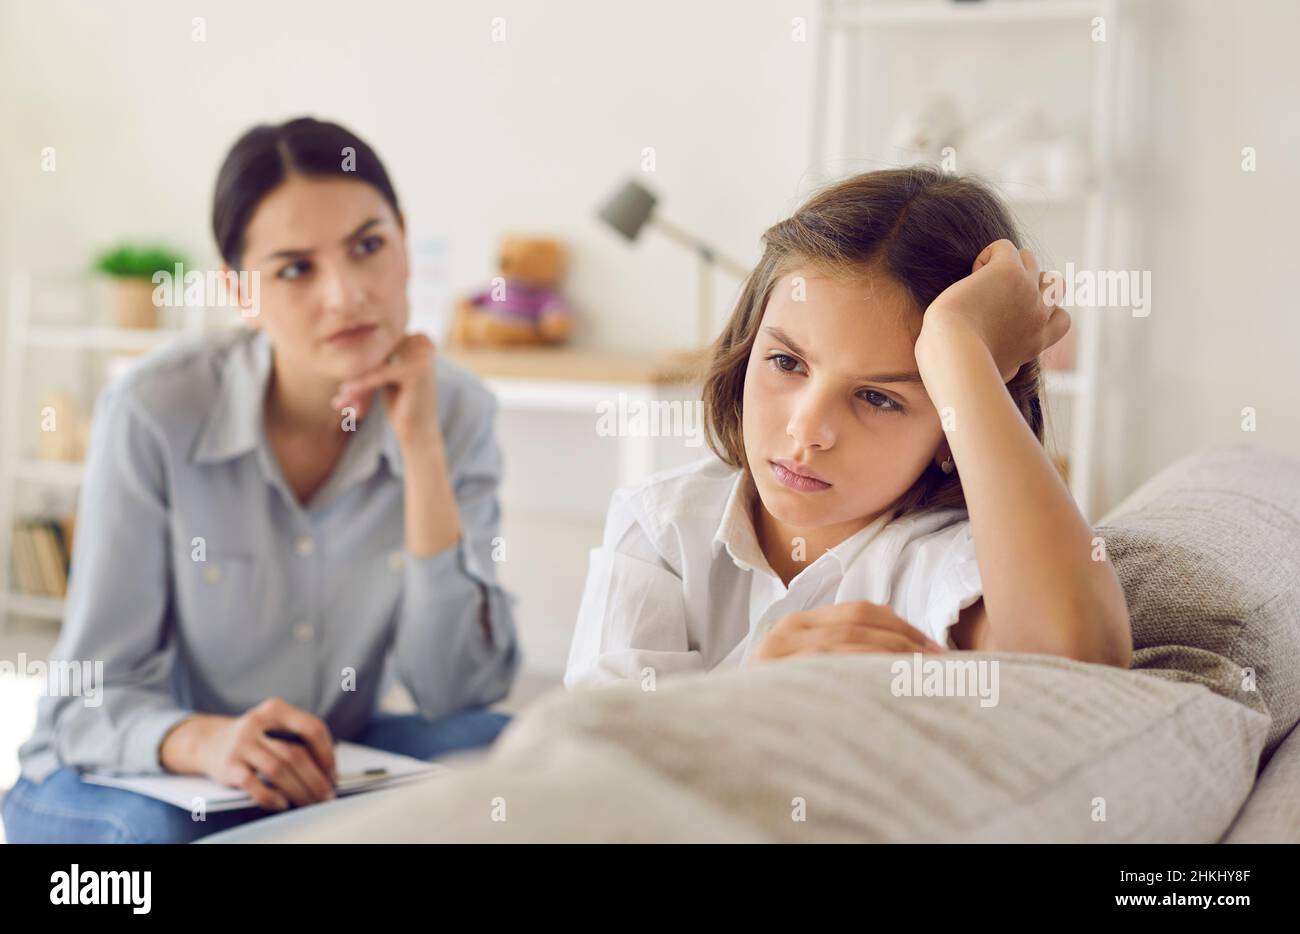 Sad child at therapist's or psychologist's office not ready to talk about problems and emotions Stock Photo